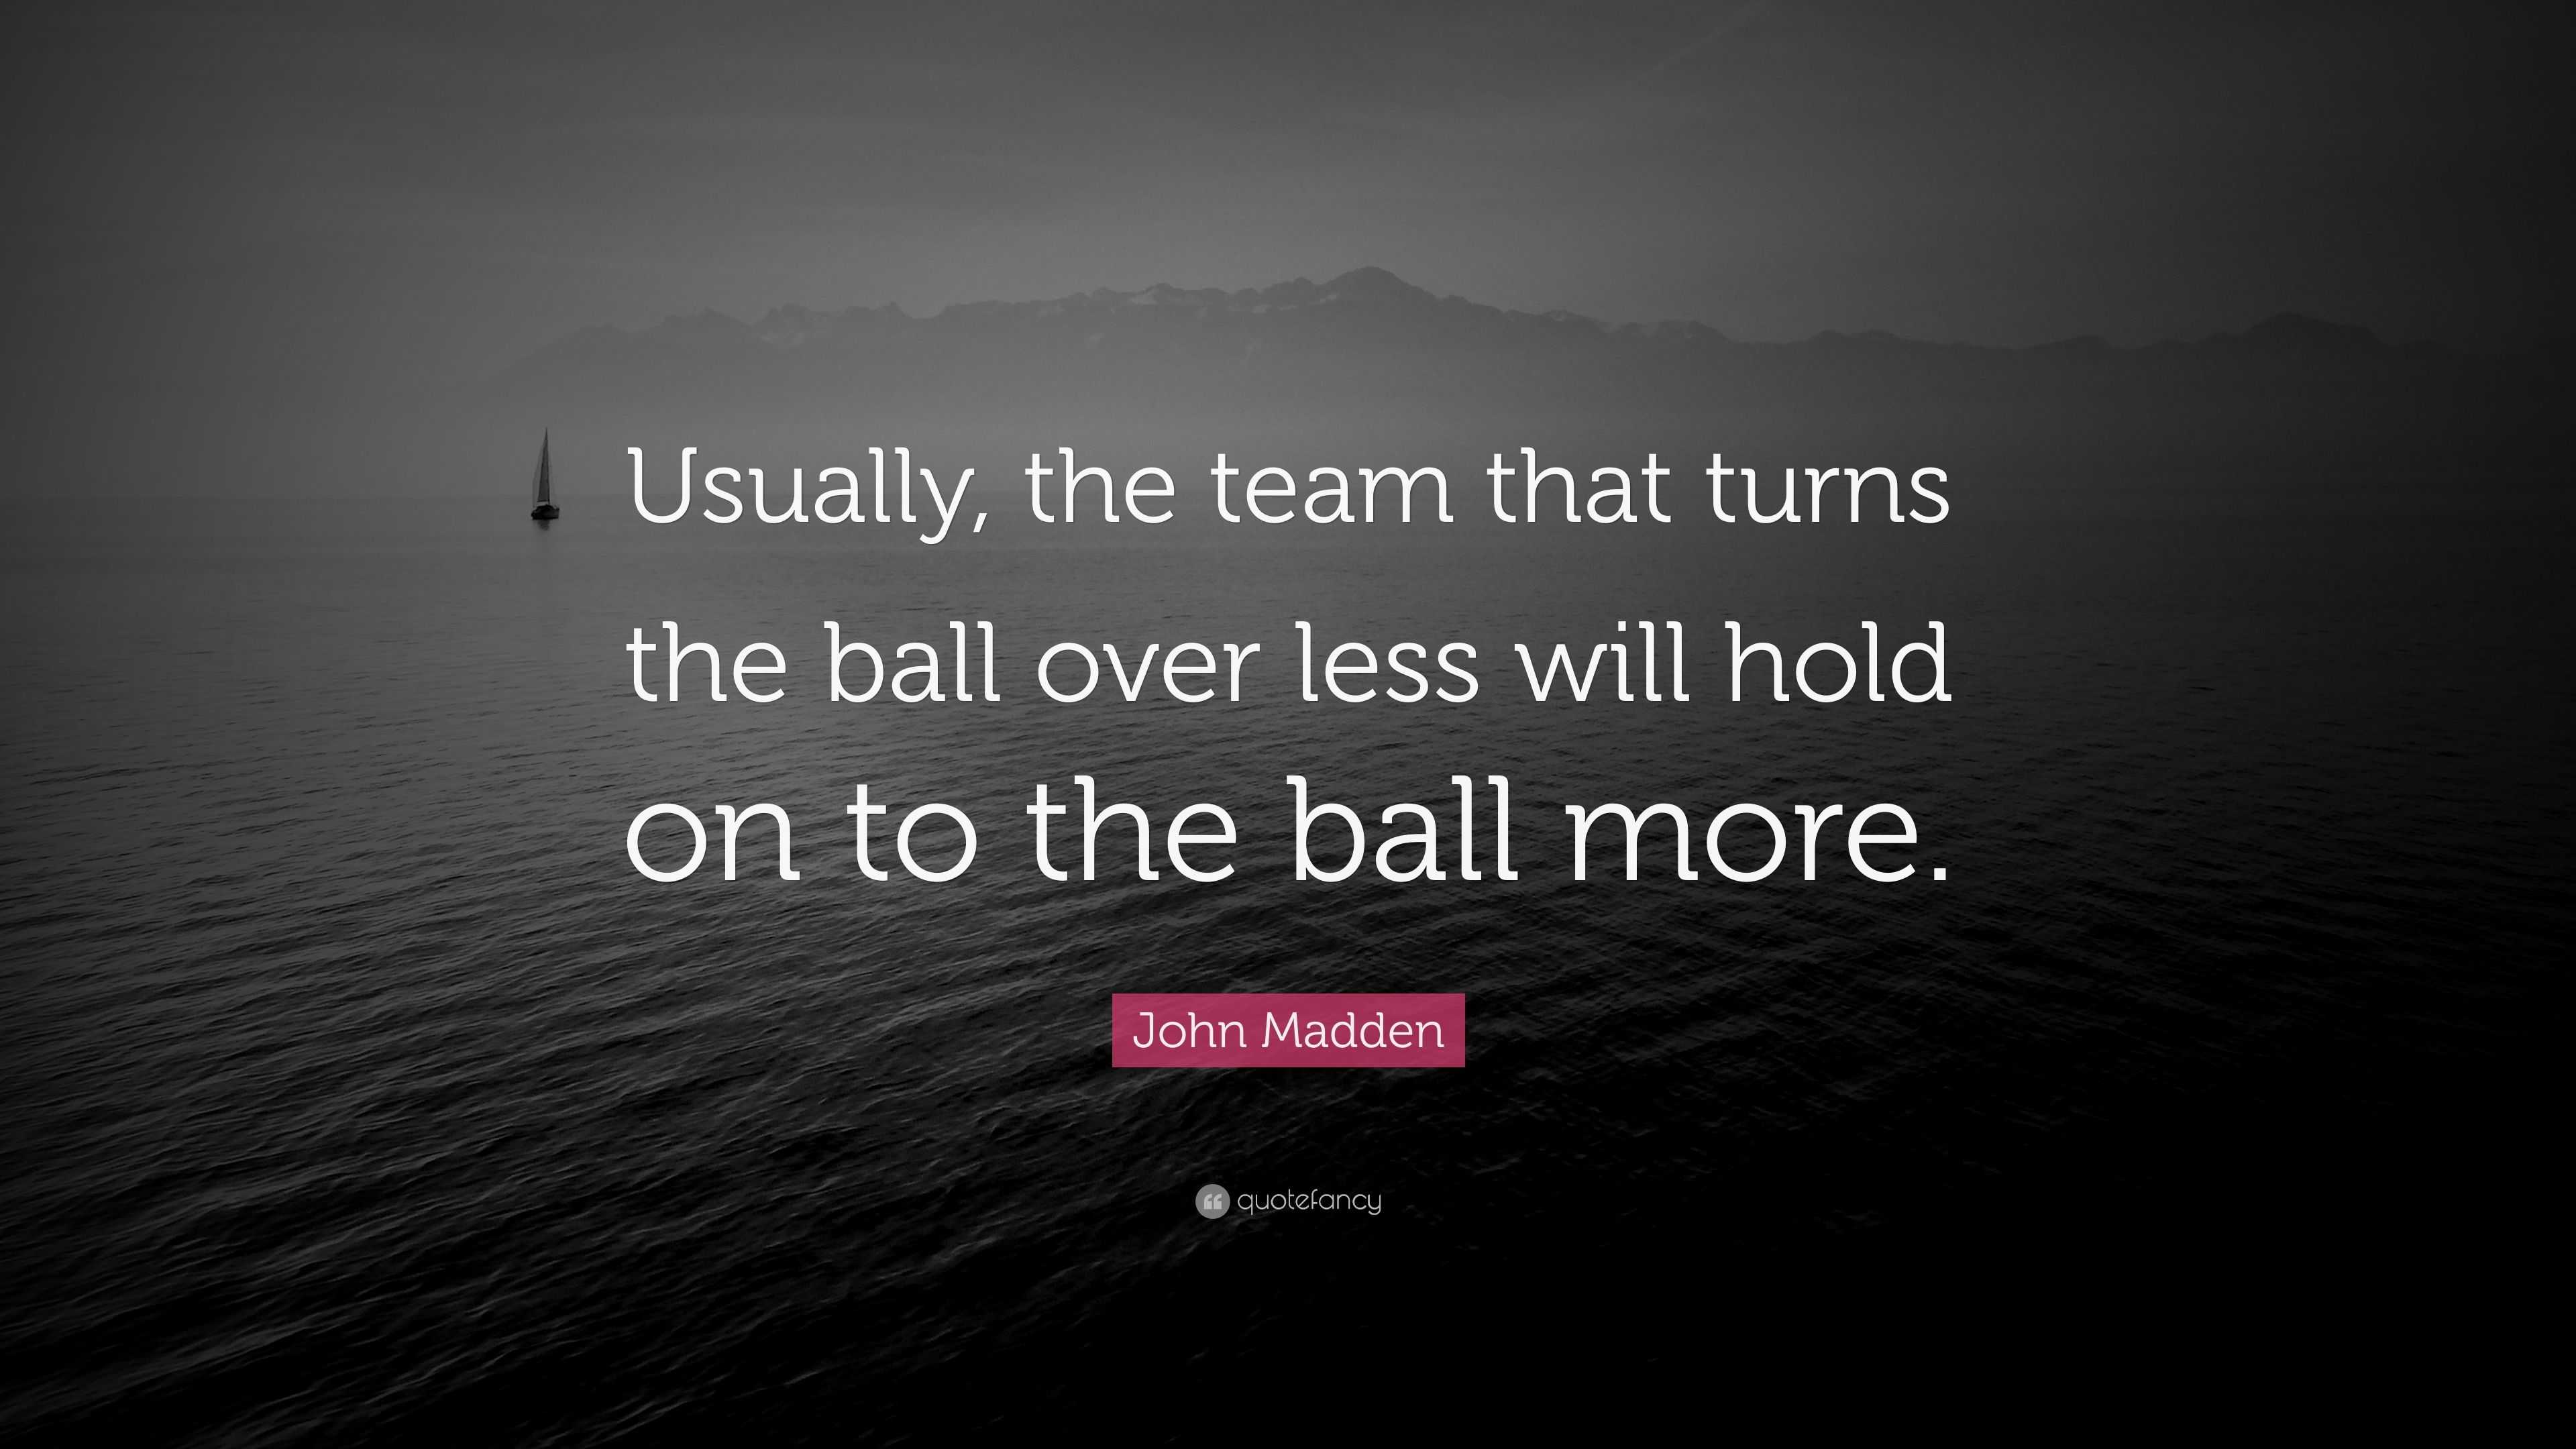 John Madden Quote: “Usually, the team that turns the ball over less ...